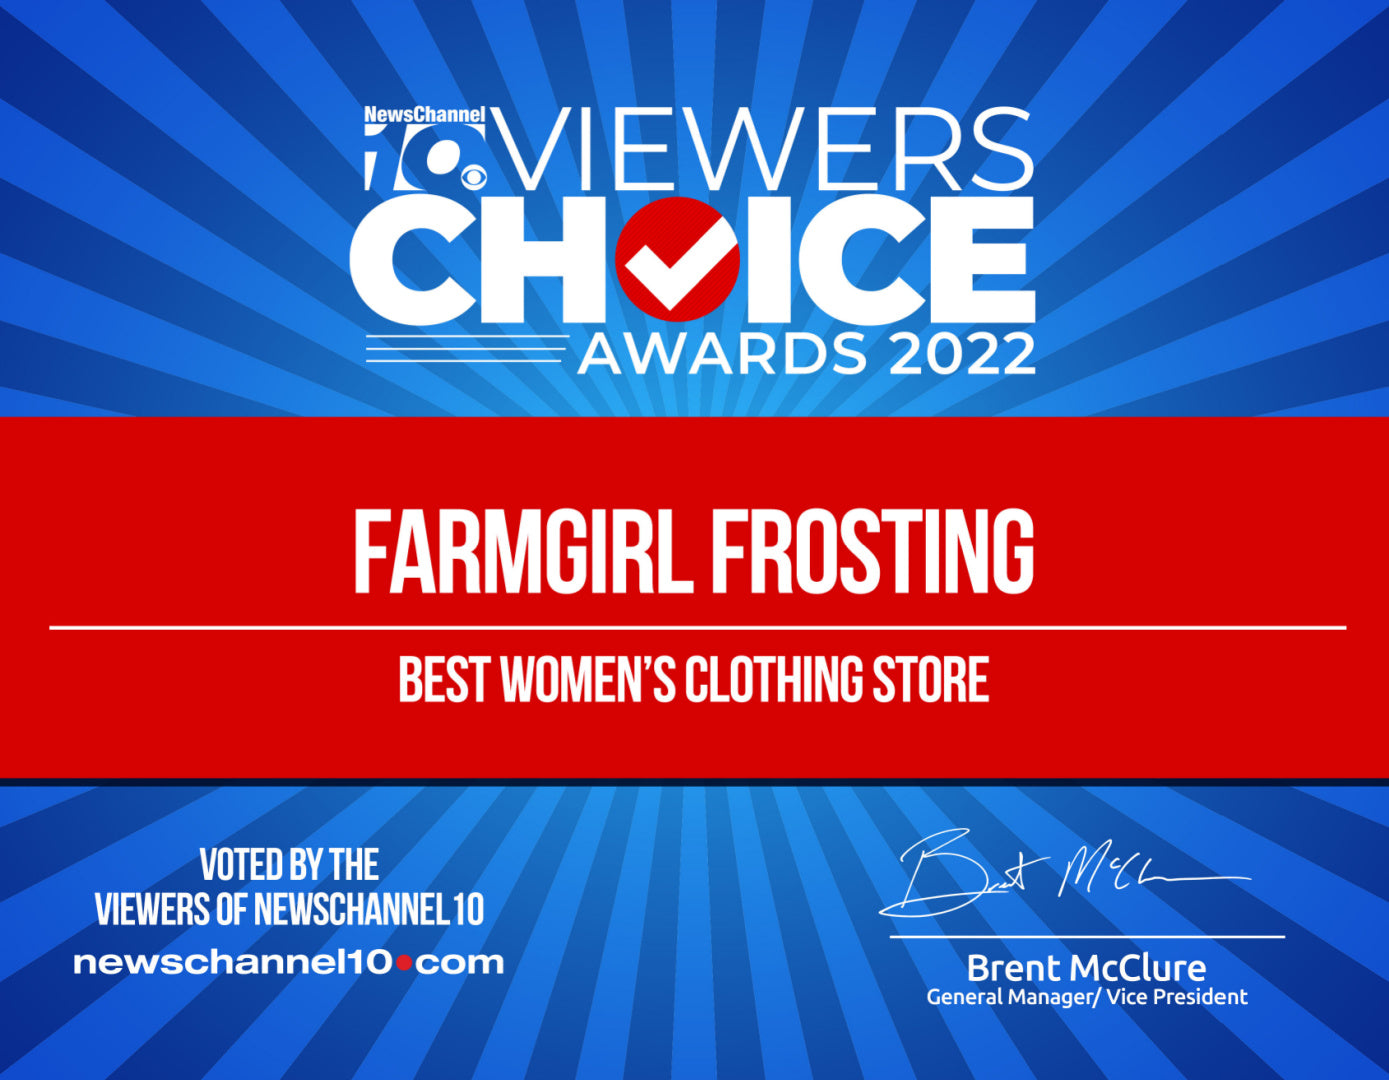 Award for Best Women's Clothing Store by News Channel 10 Viewer's Choice Awards